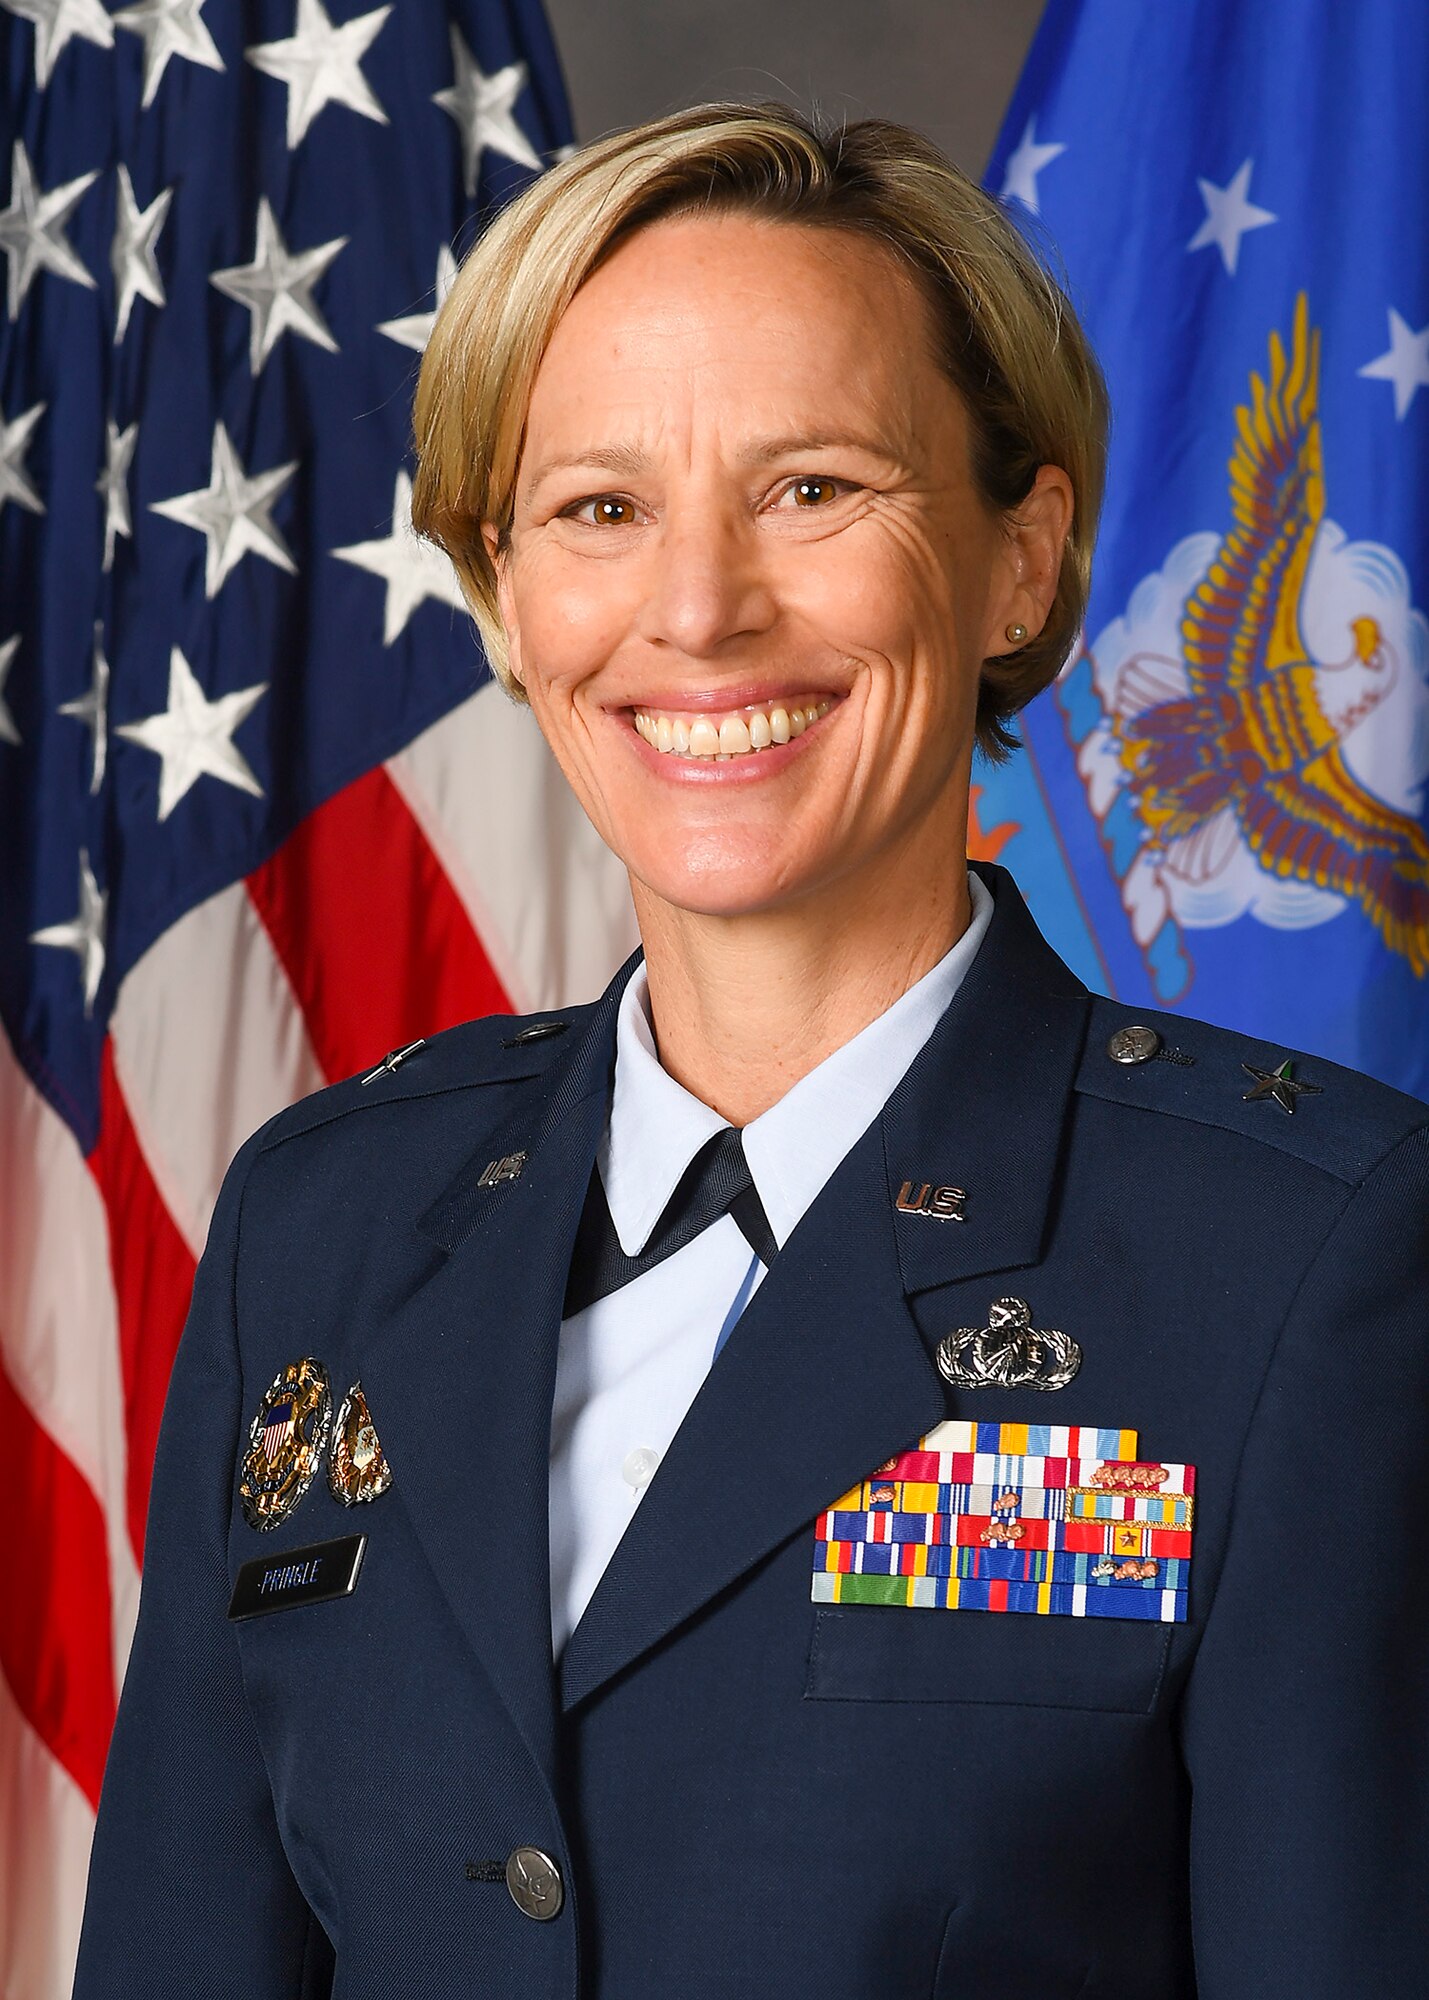 Air Force Research Laboratory Commander Brig. Gen. Heather Pringle provided a rare glimpse into the path she has blazed as a leader, woman and mother during a 30-year career in the Air Force. (U.S. Air Force photo)